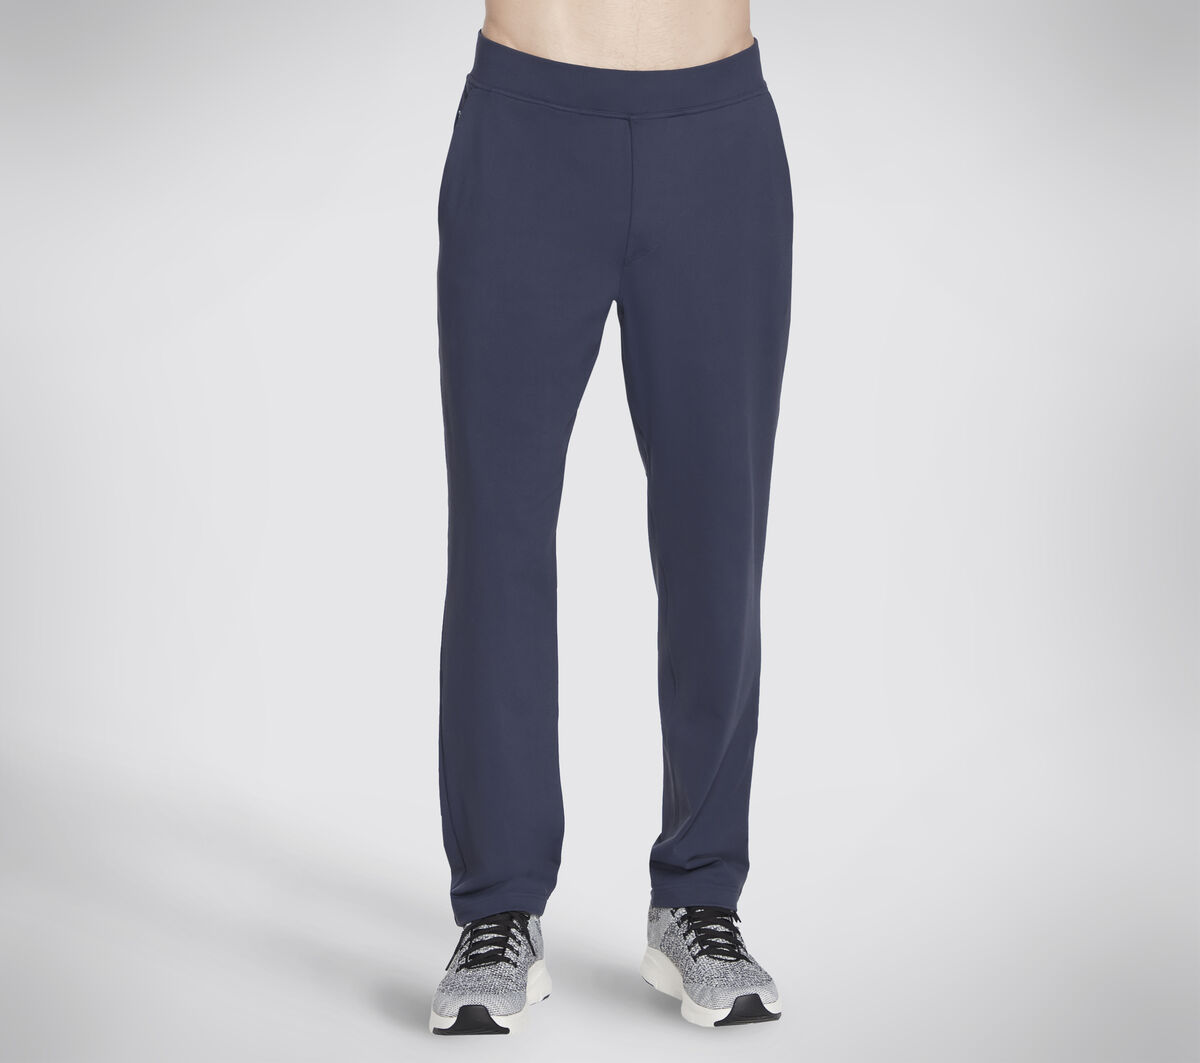 Shop the Skechers Slip-ins Pant Recharge Classic